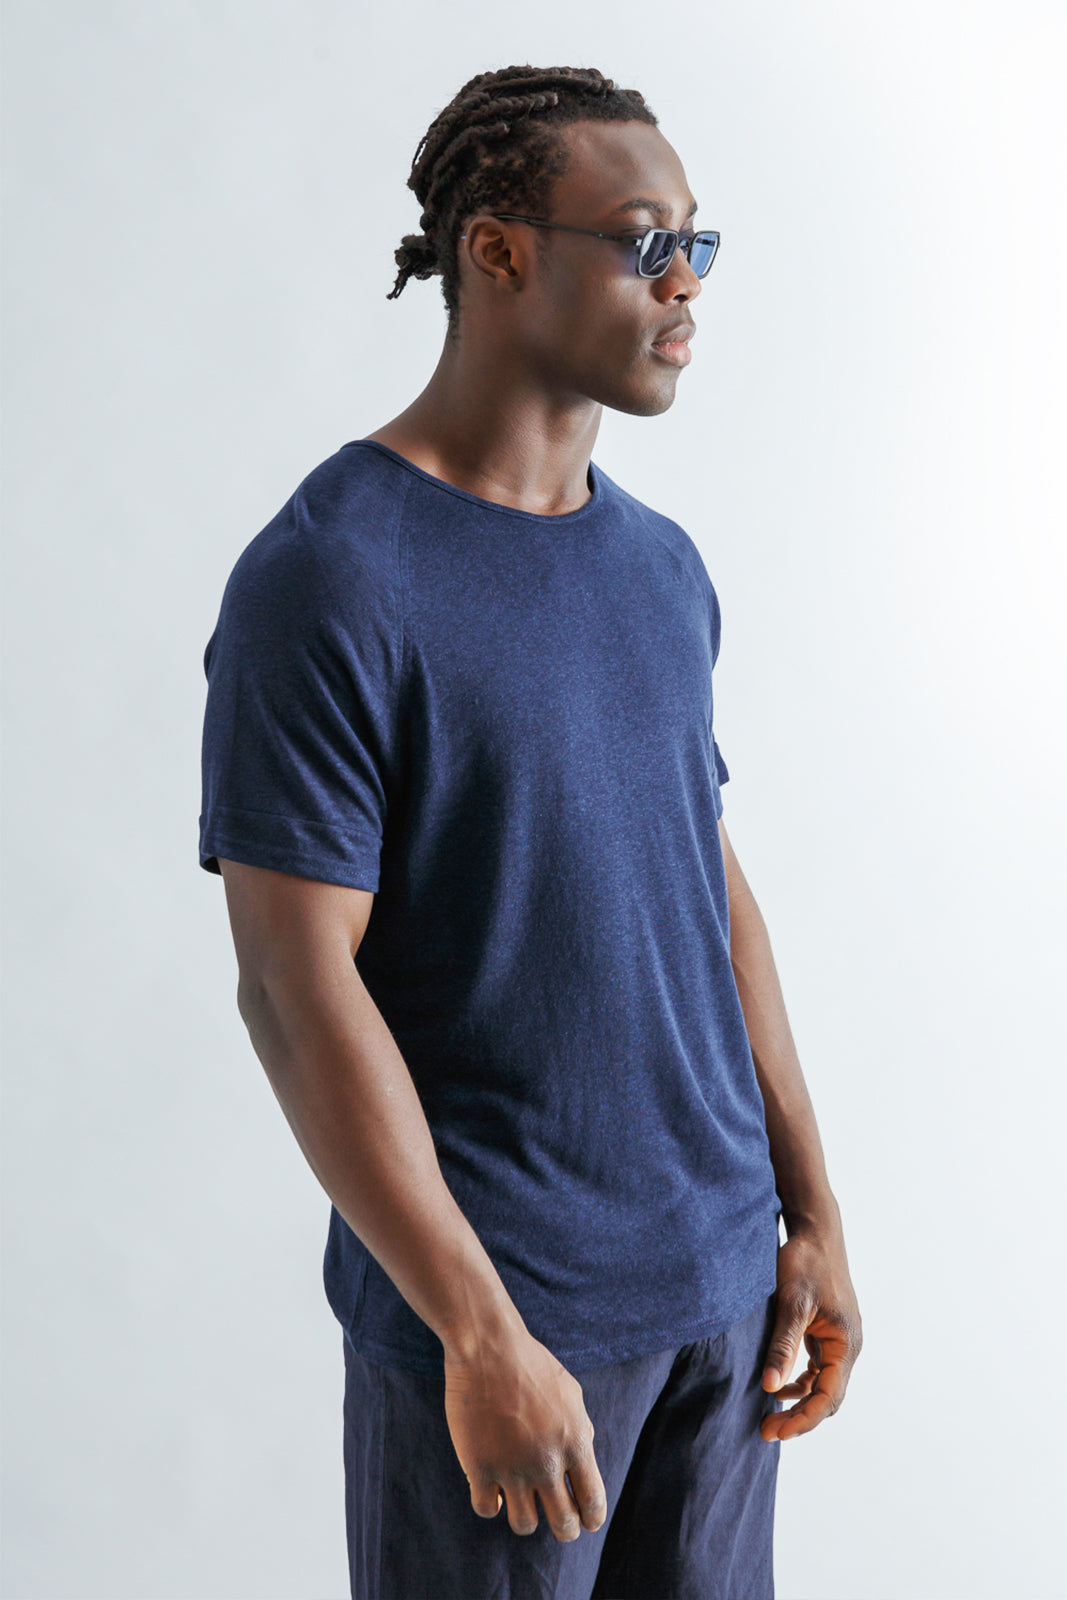 T-shirt in Linen and Viscose